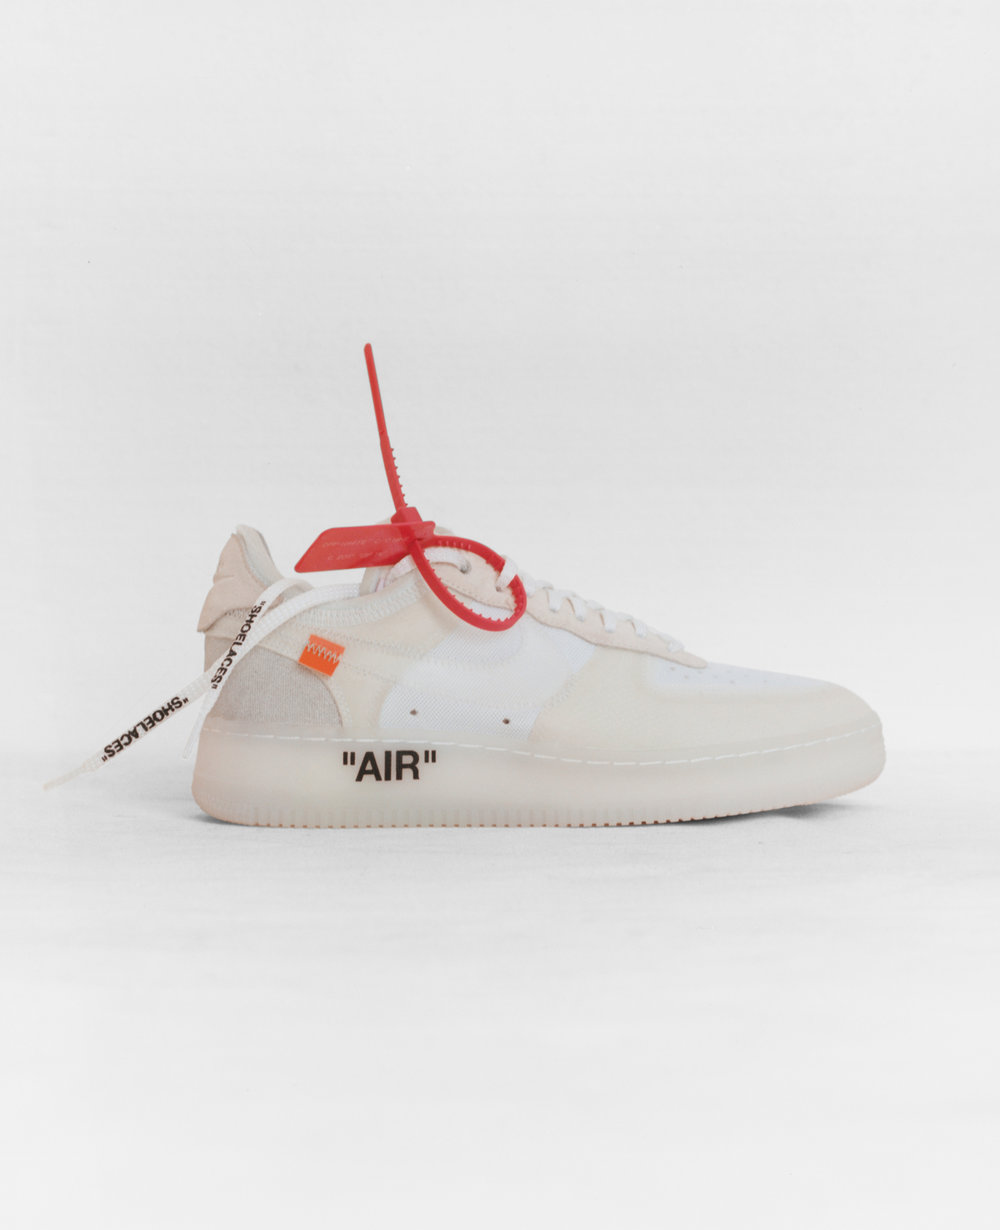 Virgil Abloh and Nike Announce New Design Project “The10” - NIKE, Inc.